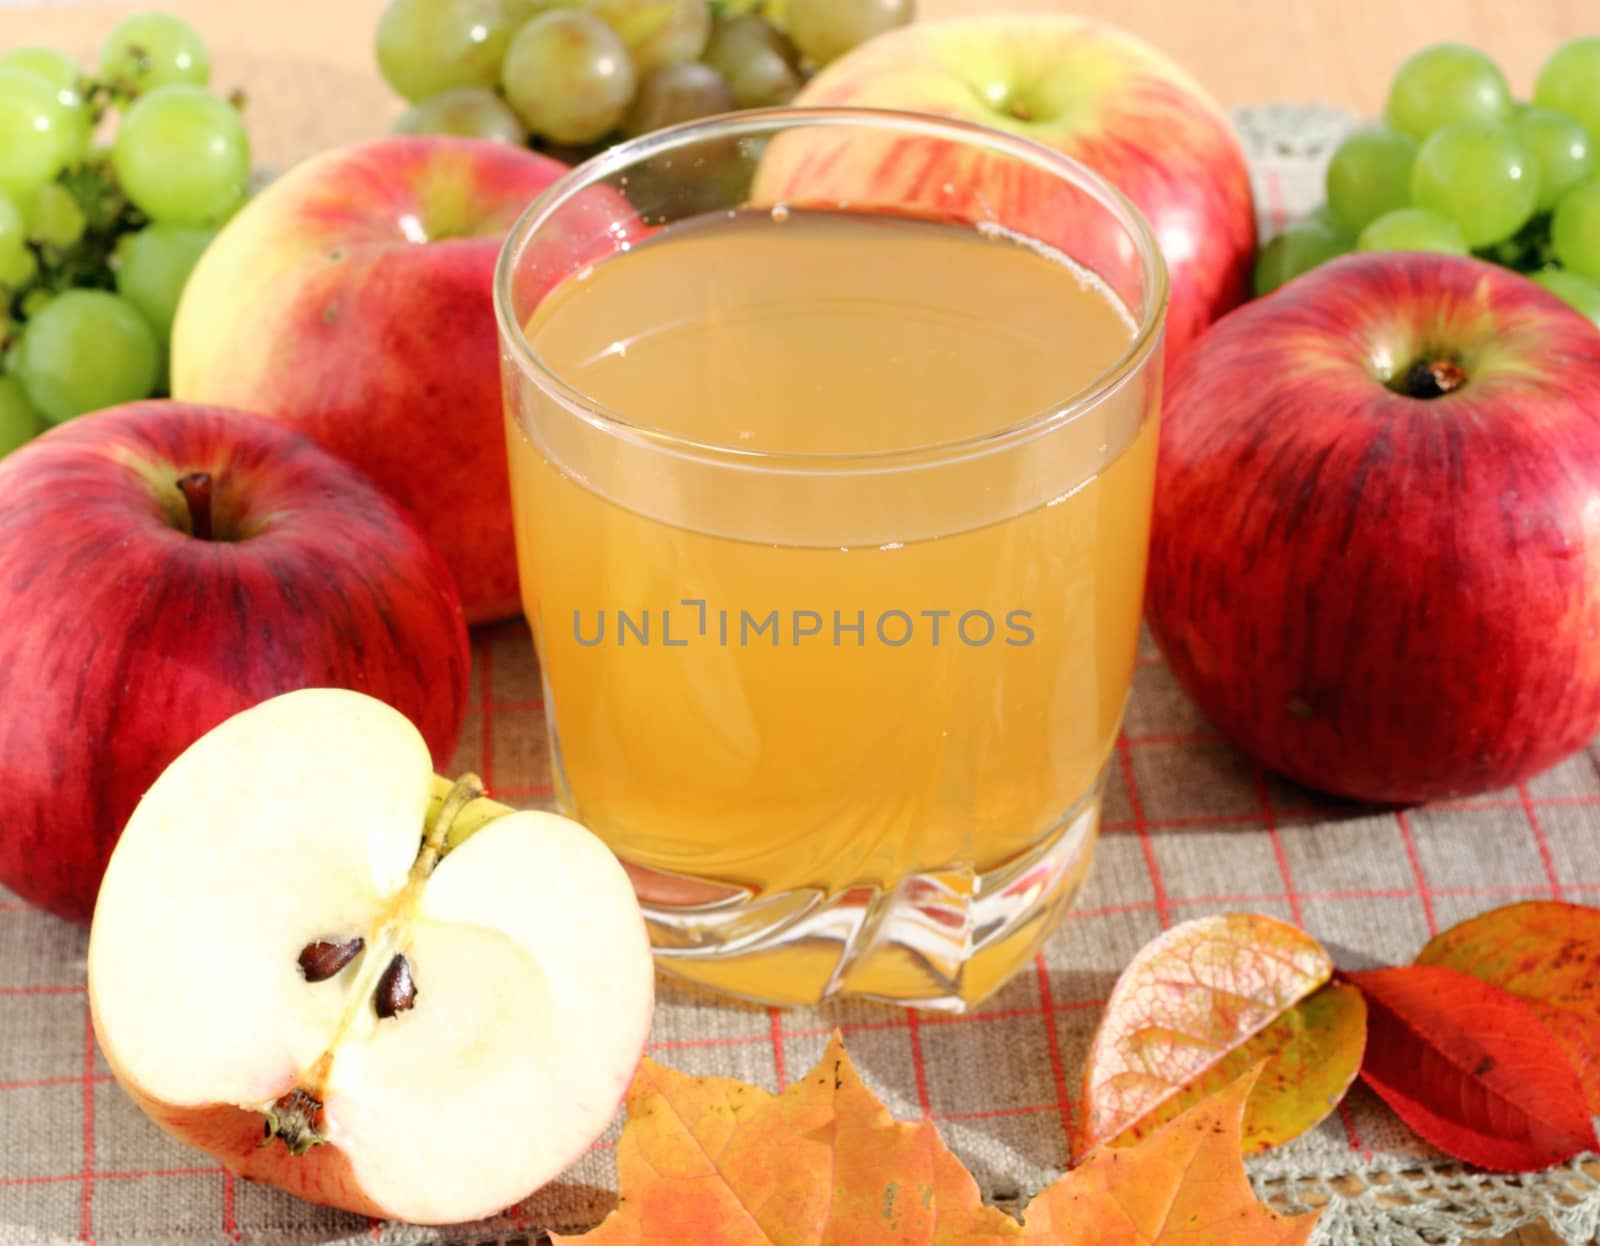  It is a glass of freshly squeezed natural apple juice